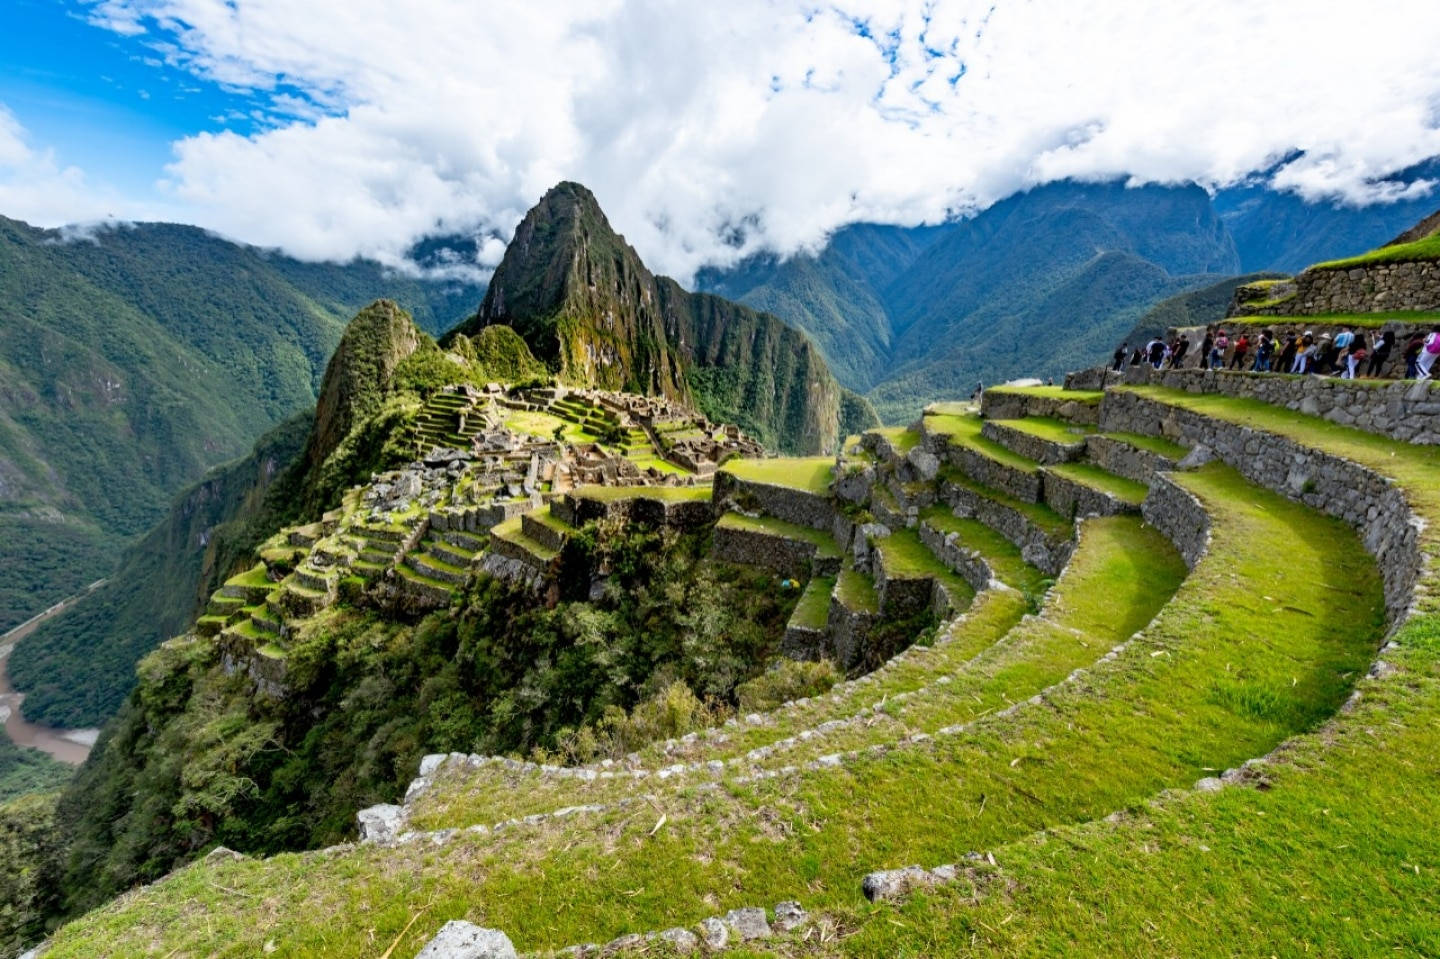 Breathtaking view of Machu Picchu ancient city on mountain steps Wallpaper